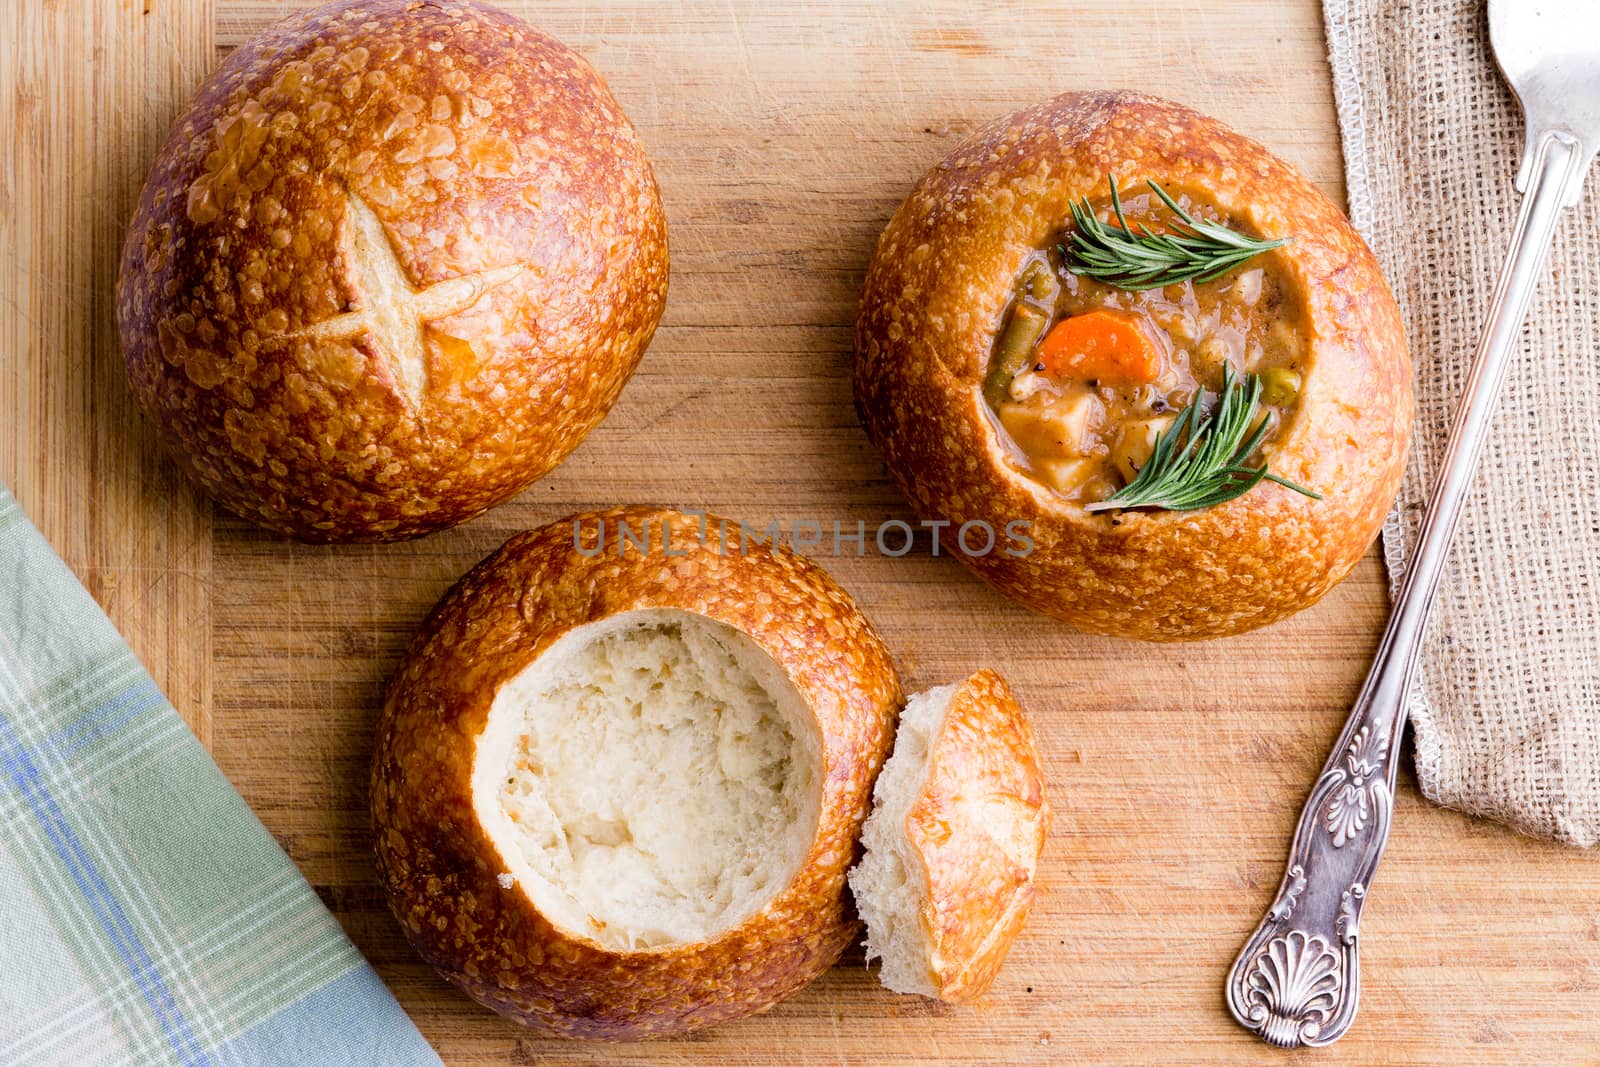 Stages in serving soup in a bread bowl by coskun